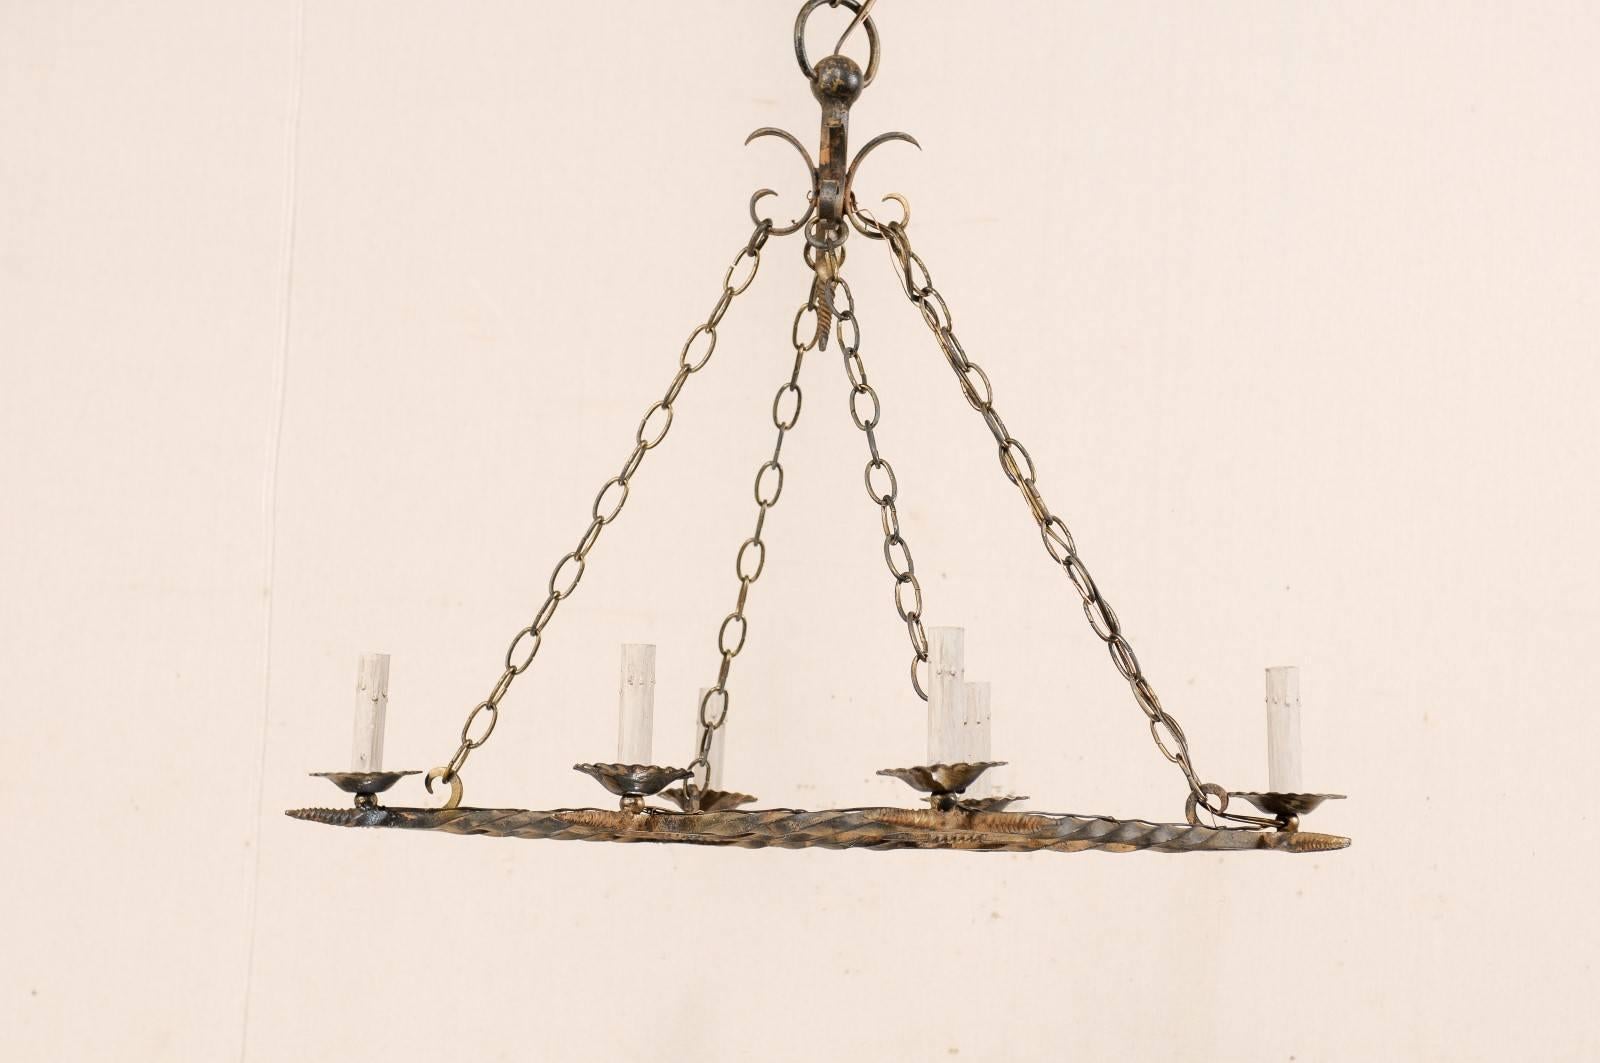 A French vintage six-light painted iron chandelier. This French mid-20th century iron chandelier has an overall rectangular shape comprised of two horizontally positioned parallel bars, crossed perpendicularly with three shorter bars. Each of the